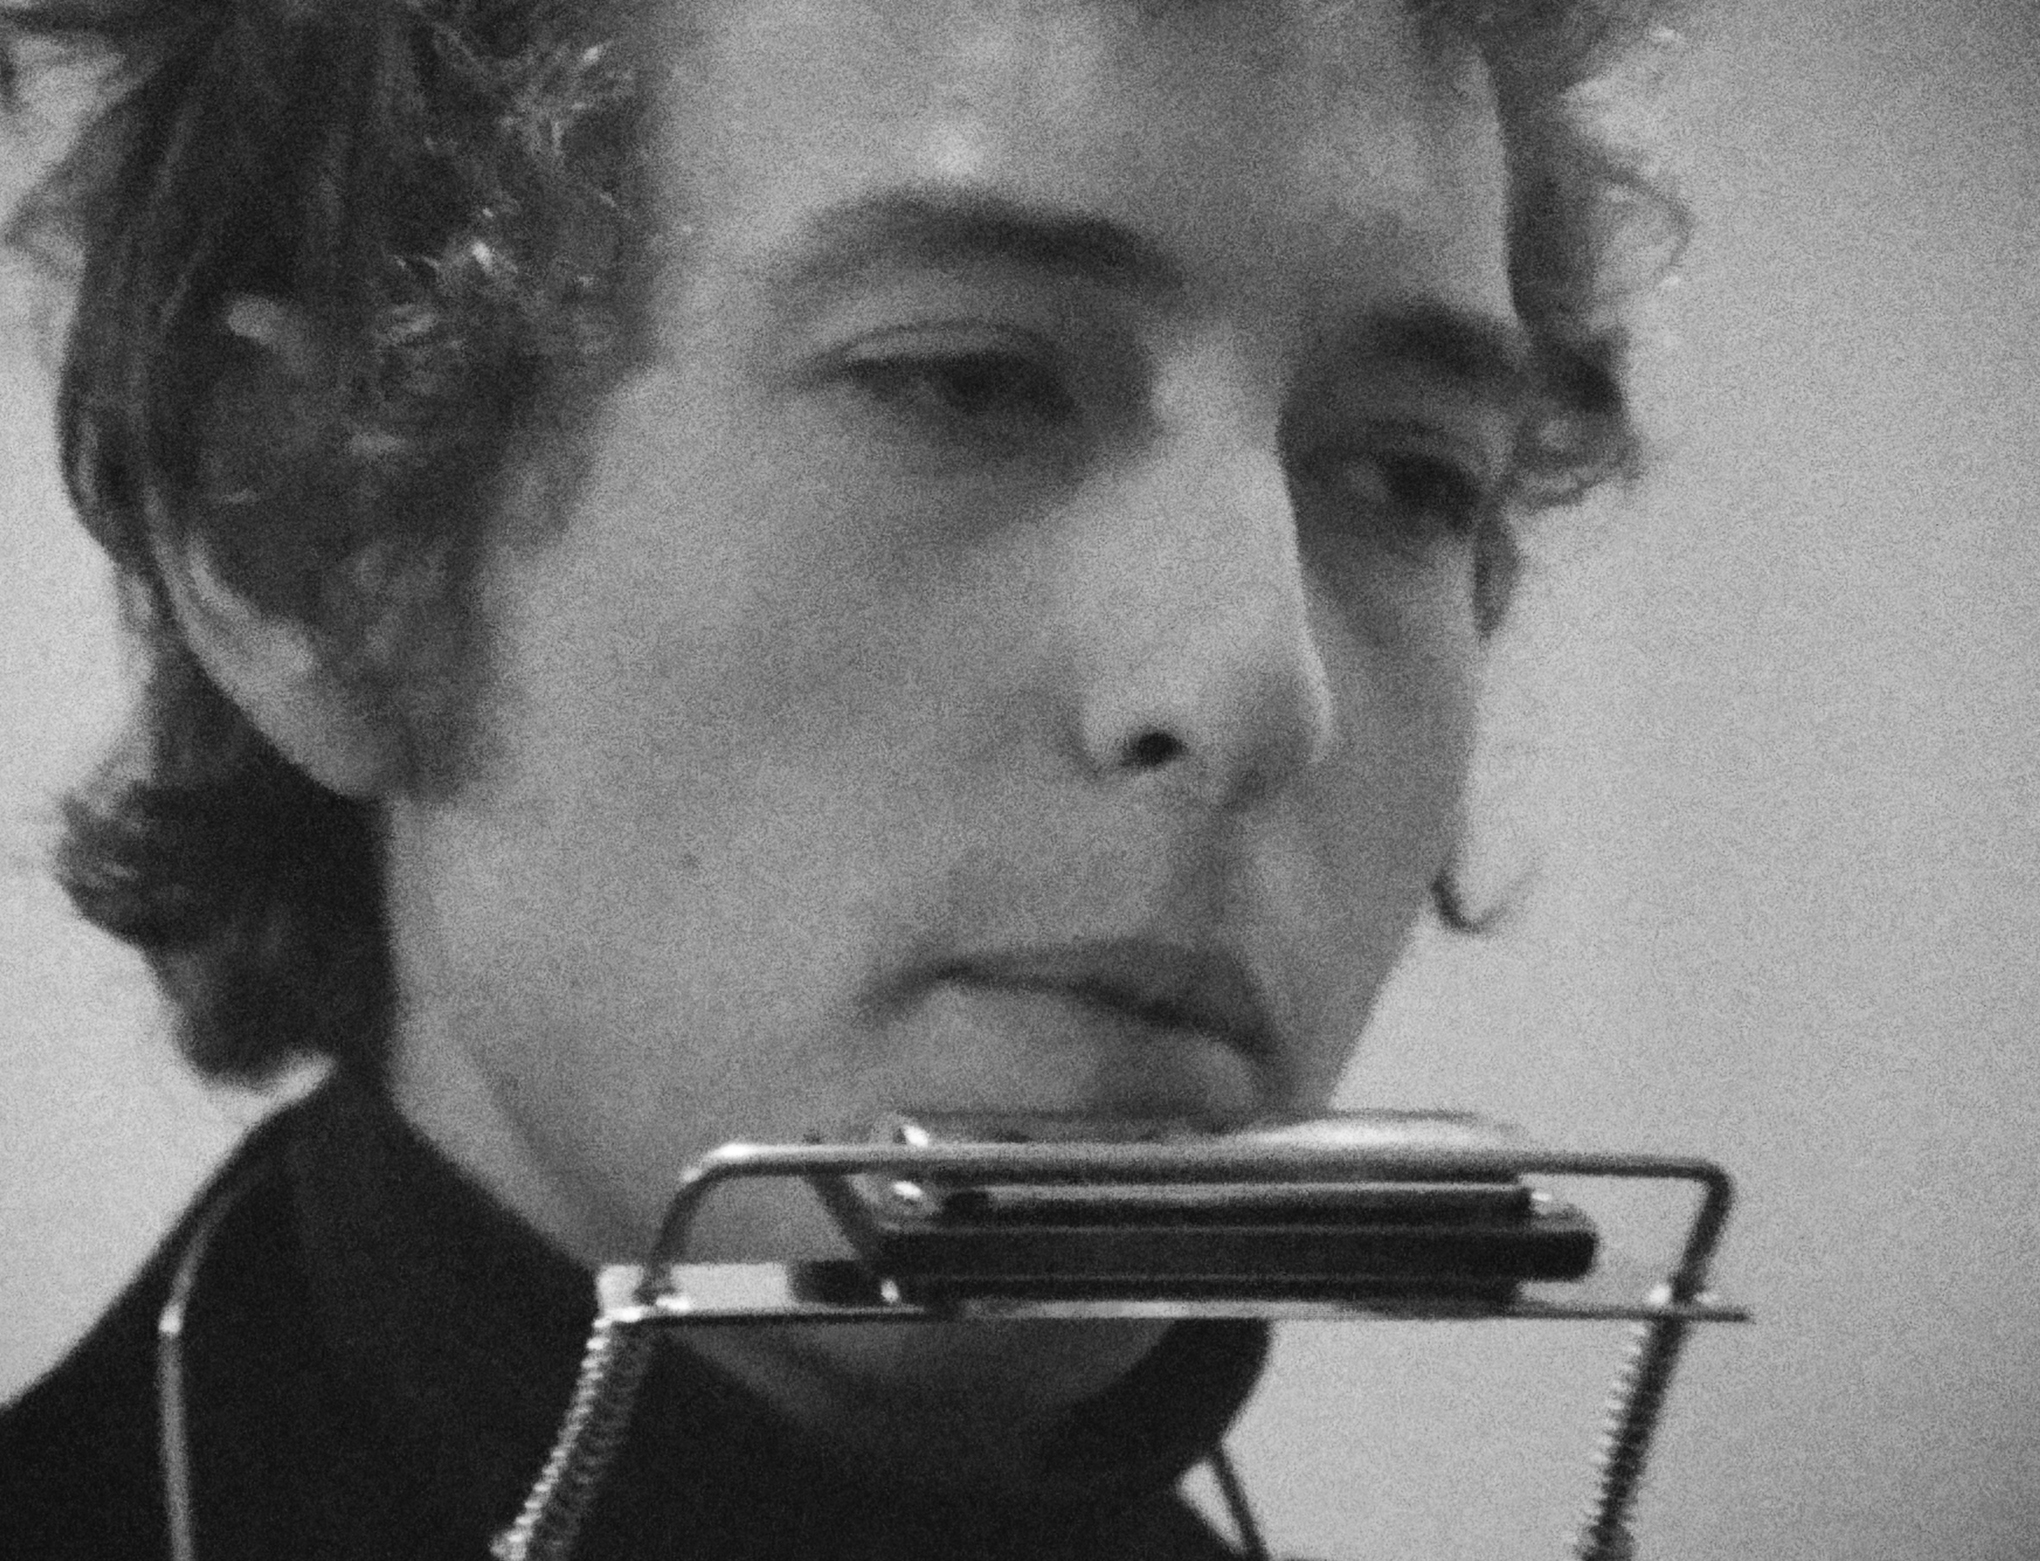 Bob Dylan backstage at Newcastle City Hall in London, 1965.